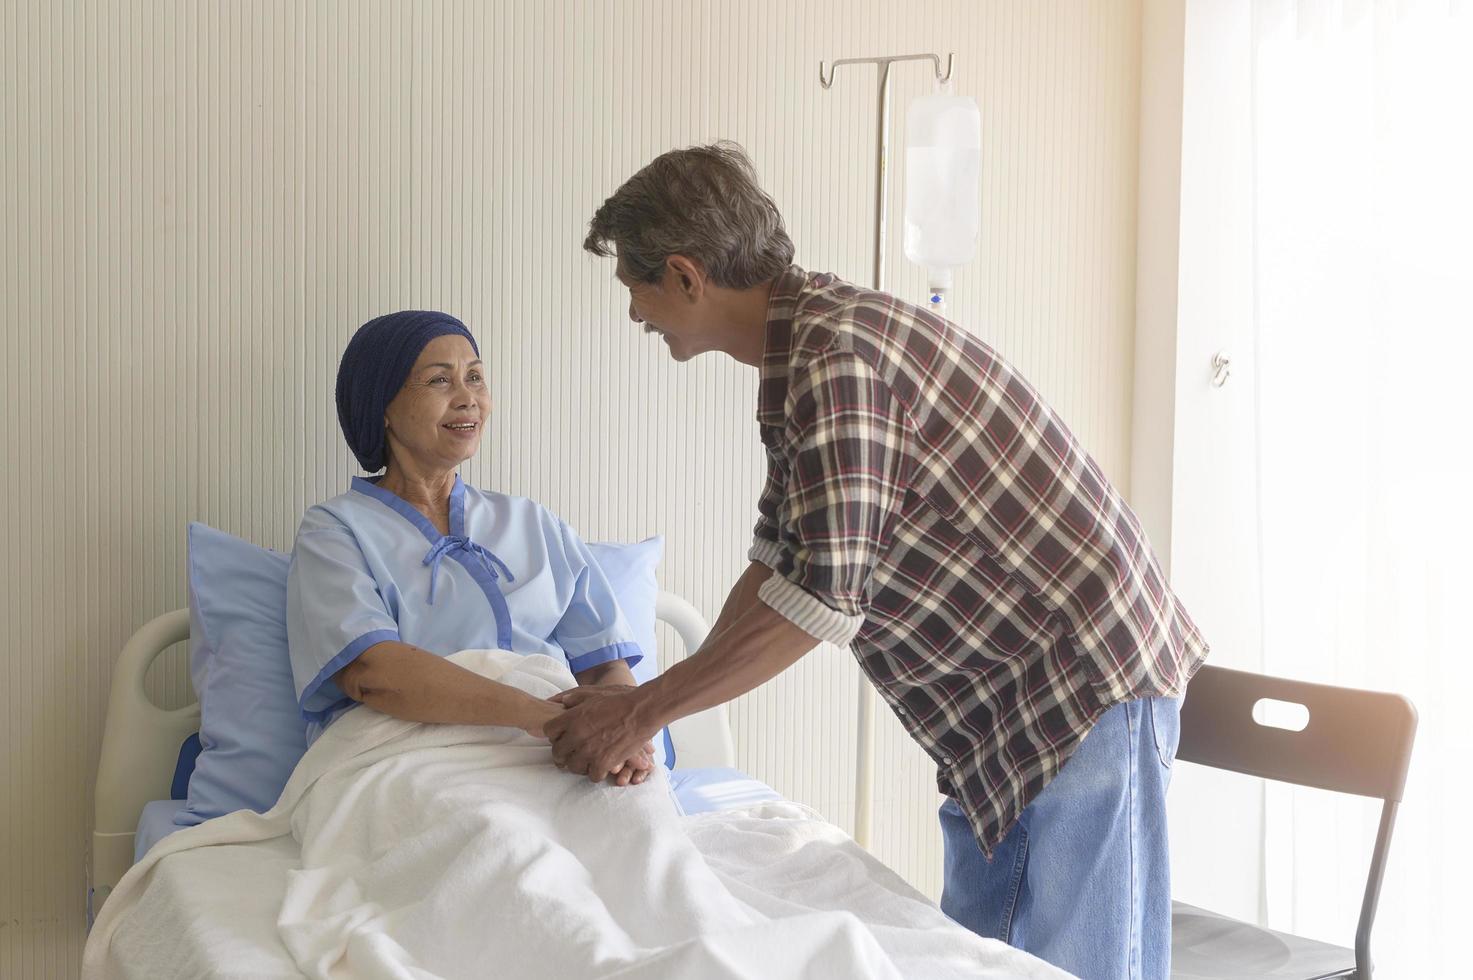 Senior man visiting cancer patient woman wearing head scarf at hospital, health care and medical concept photo